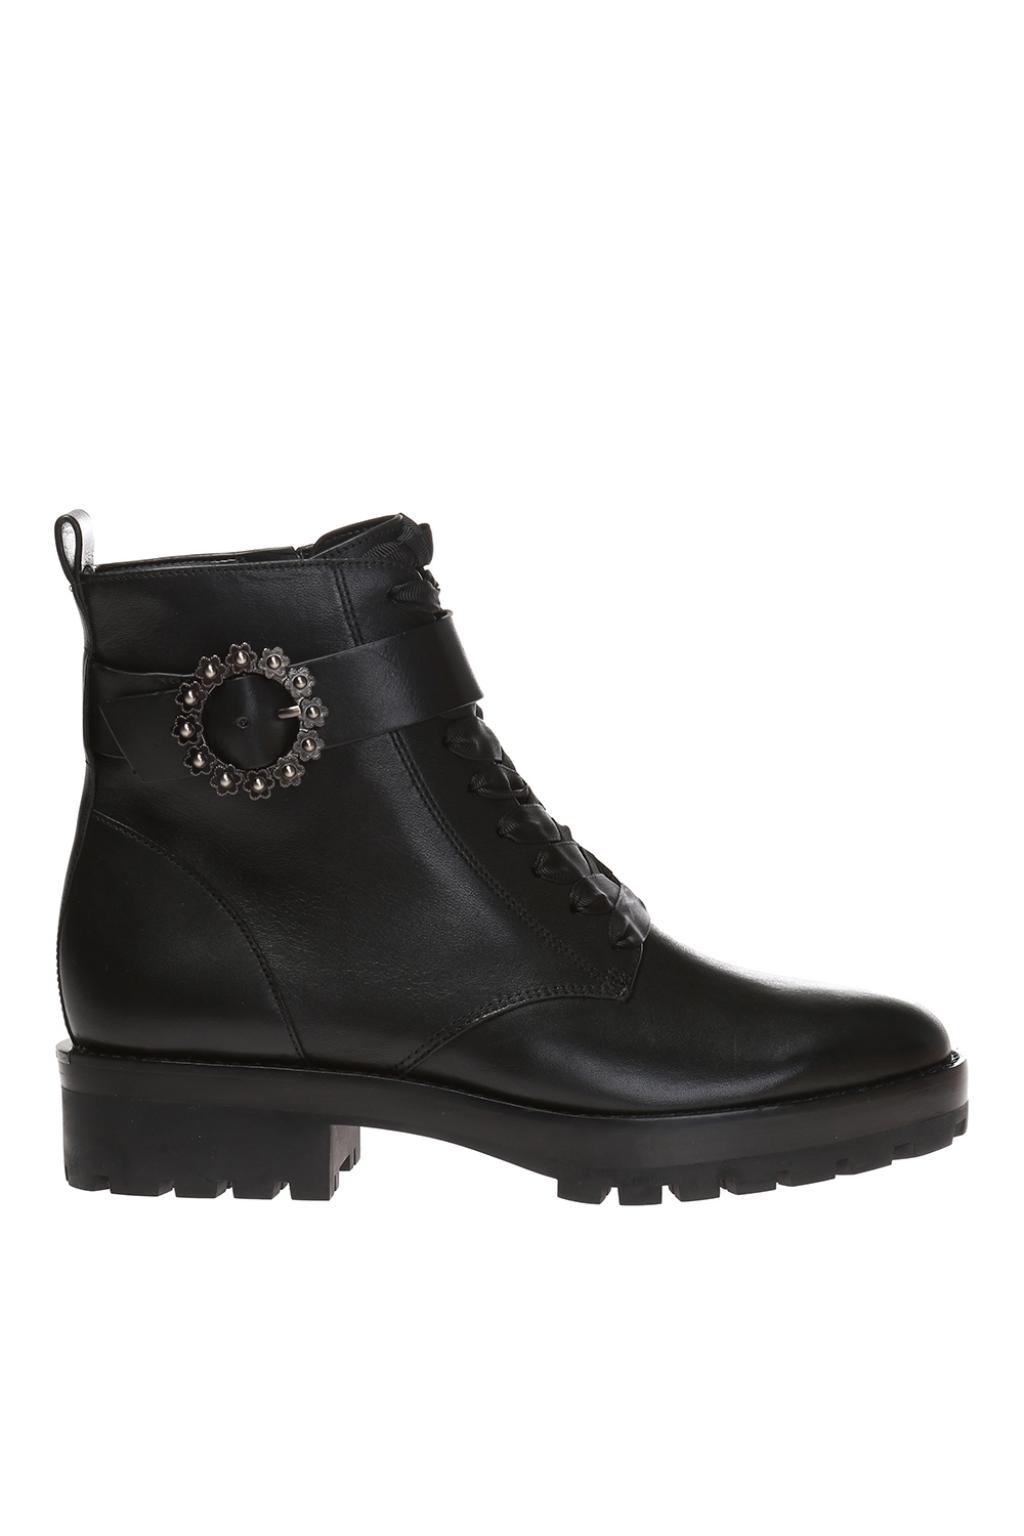 michael kors ryder leather ankle boot